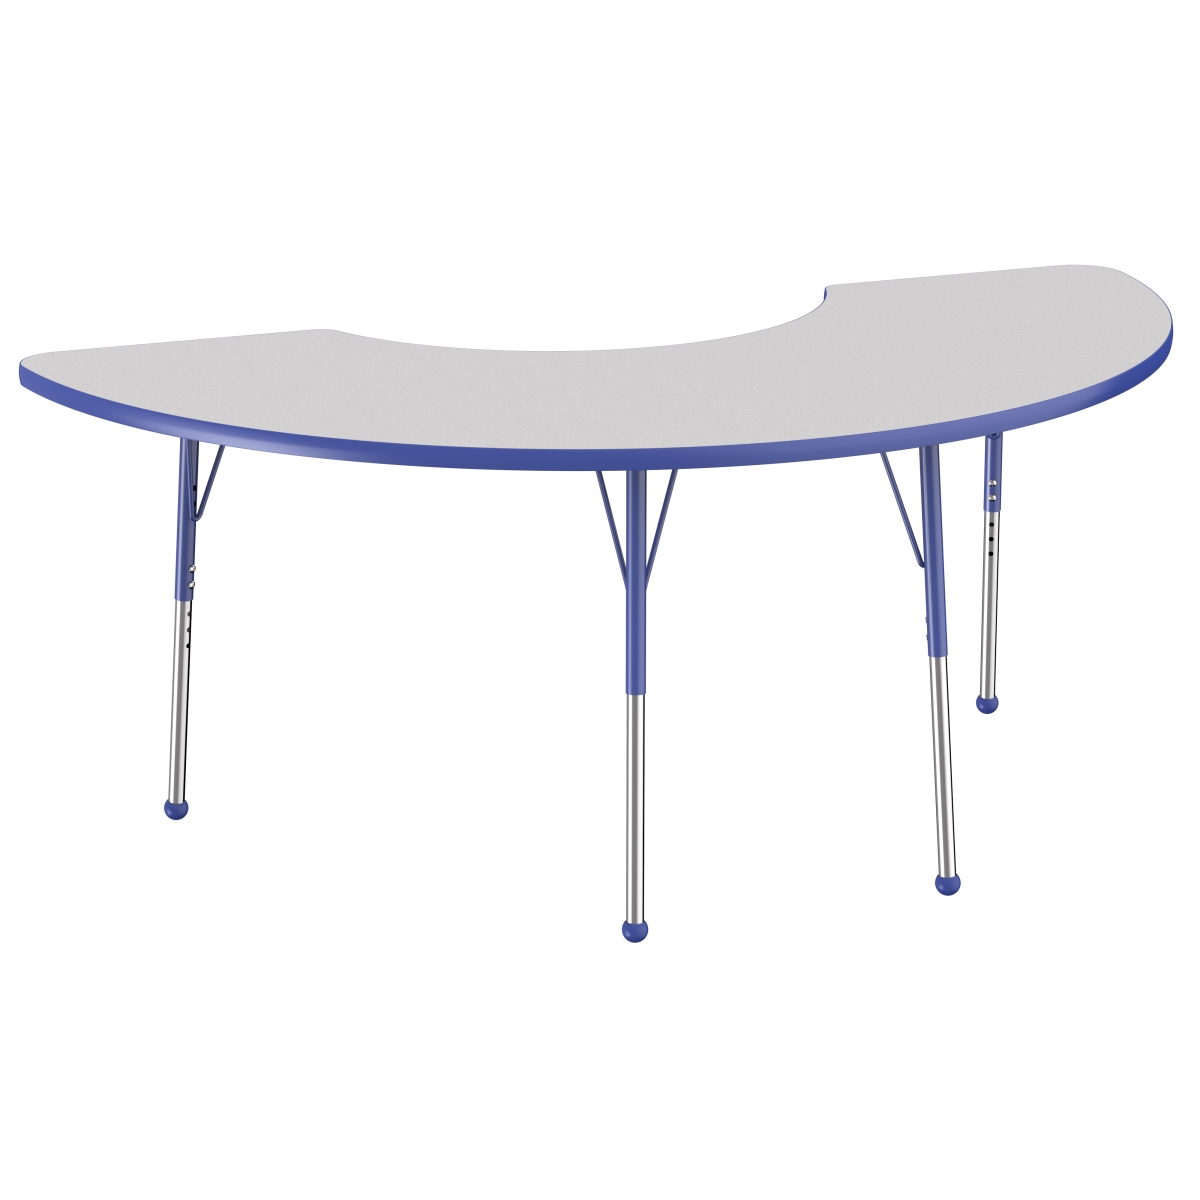 10078-gybl 36 X 72 In. Half Moon T-mold Adjustable Activity Table With Standard Ball - Grey & Blue